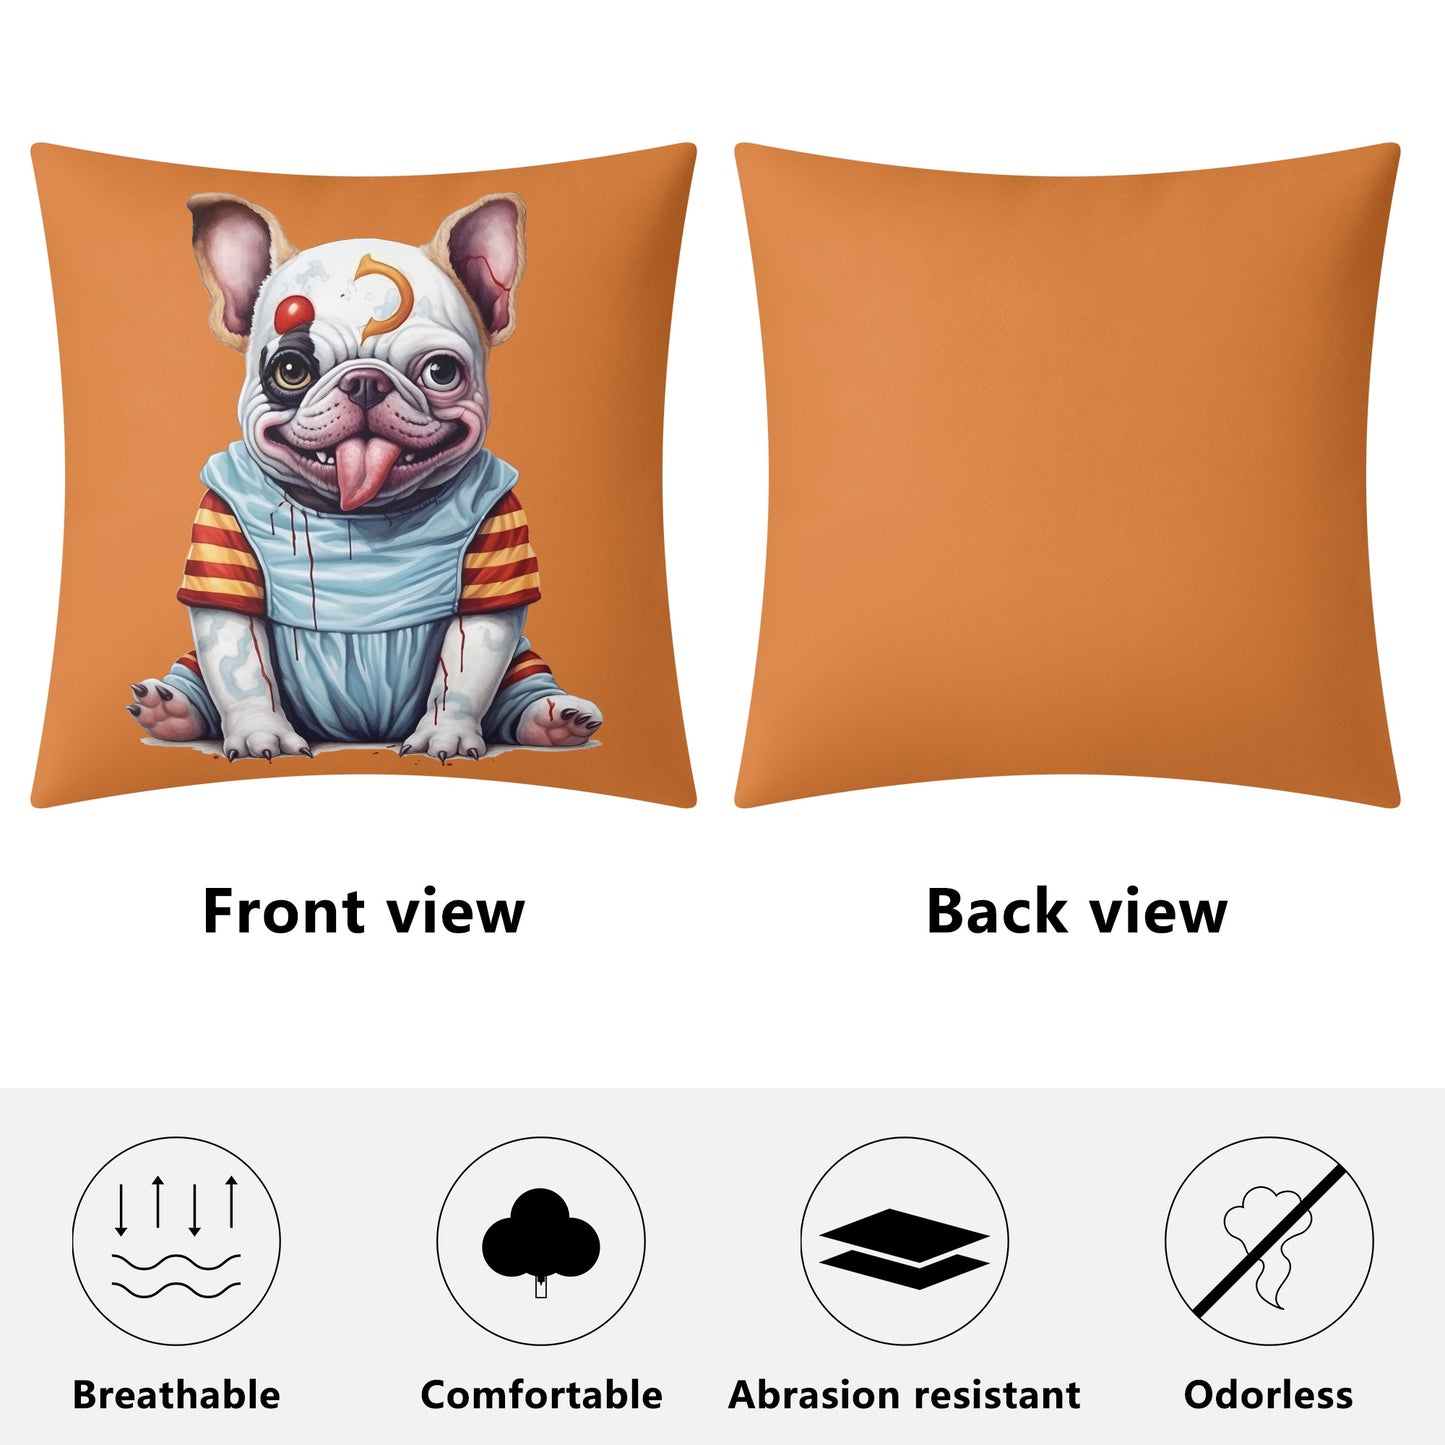 chucky doll style - Pillow Cover